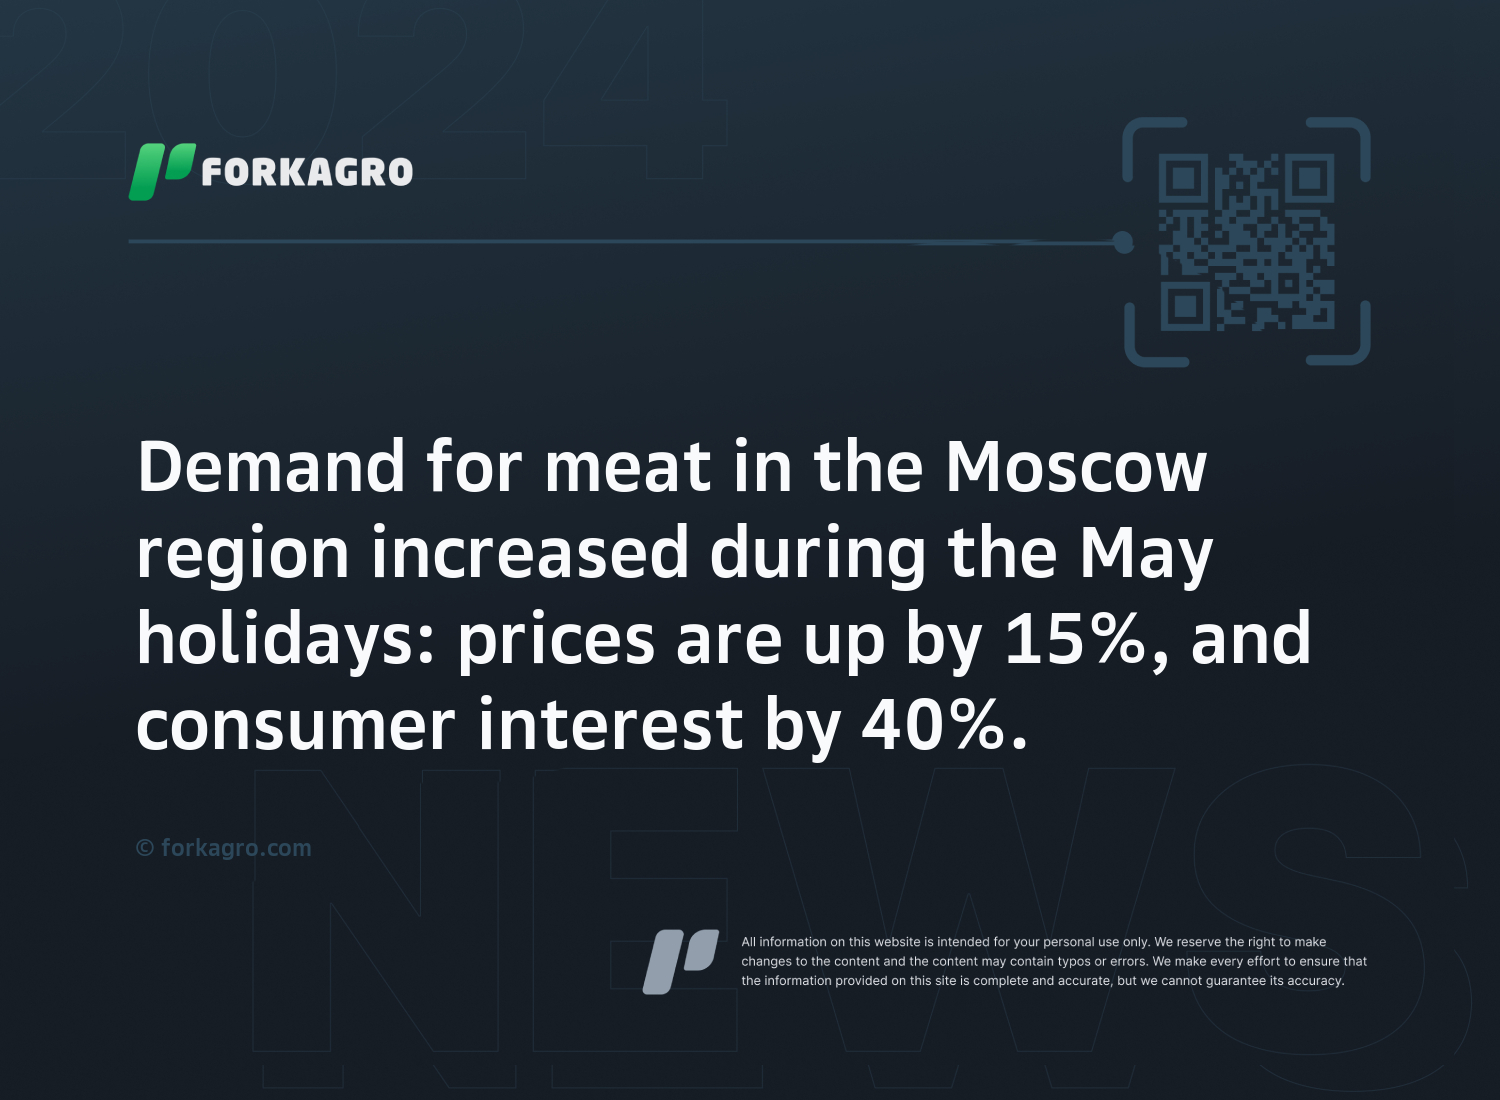 Demand for meat in the Moscow region increased during the May holidays: prices are up by 15%, and consumer interest by 40%.